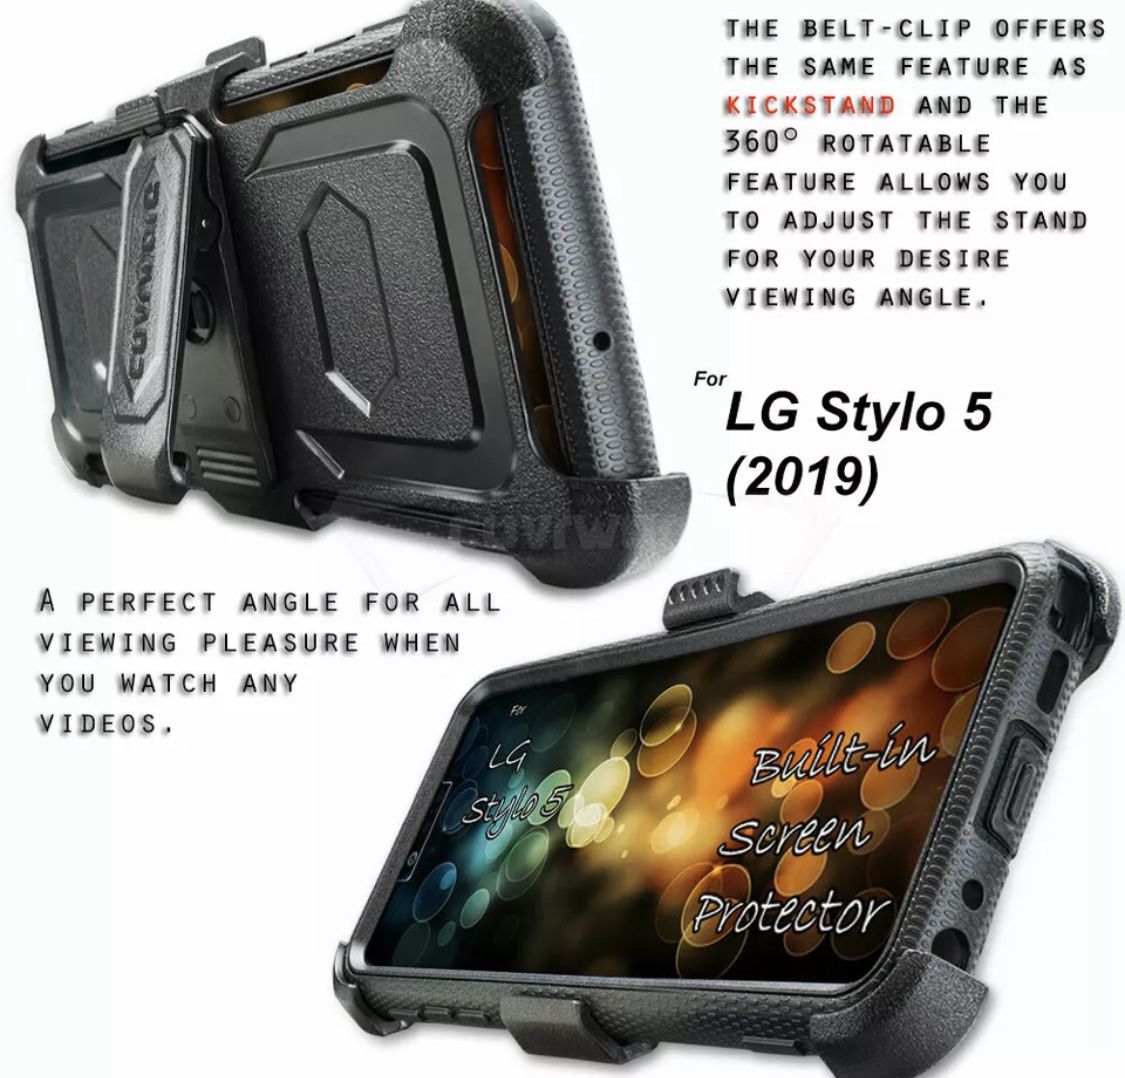 Built-In Screen Protector / Kickstand LG Stylo 5 / 5x / 5+ Plus 2019 Armor Holster Case Belt Clip Phone Cover